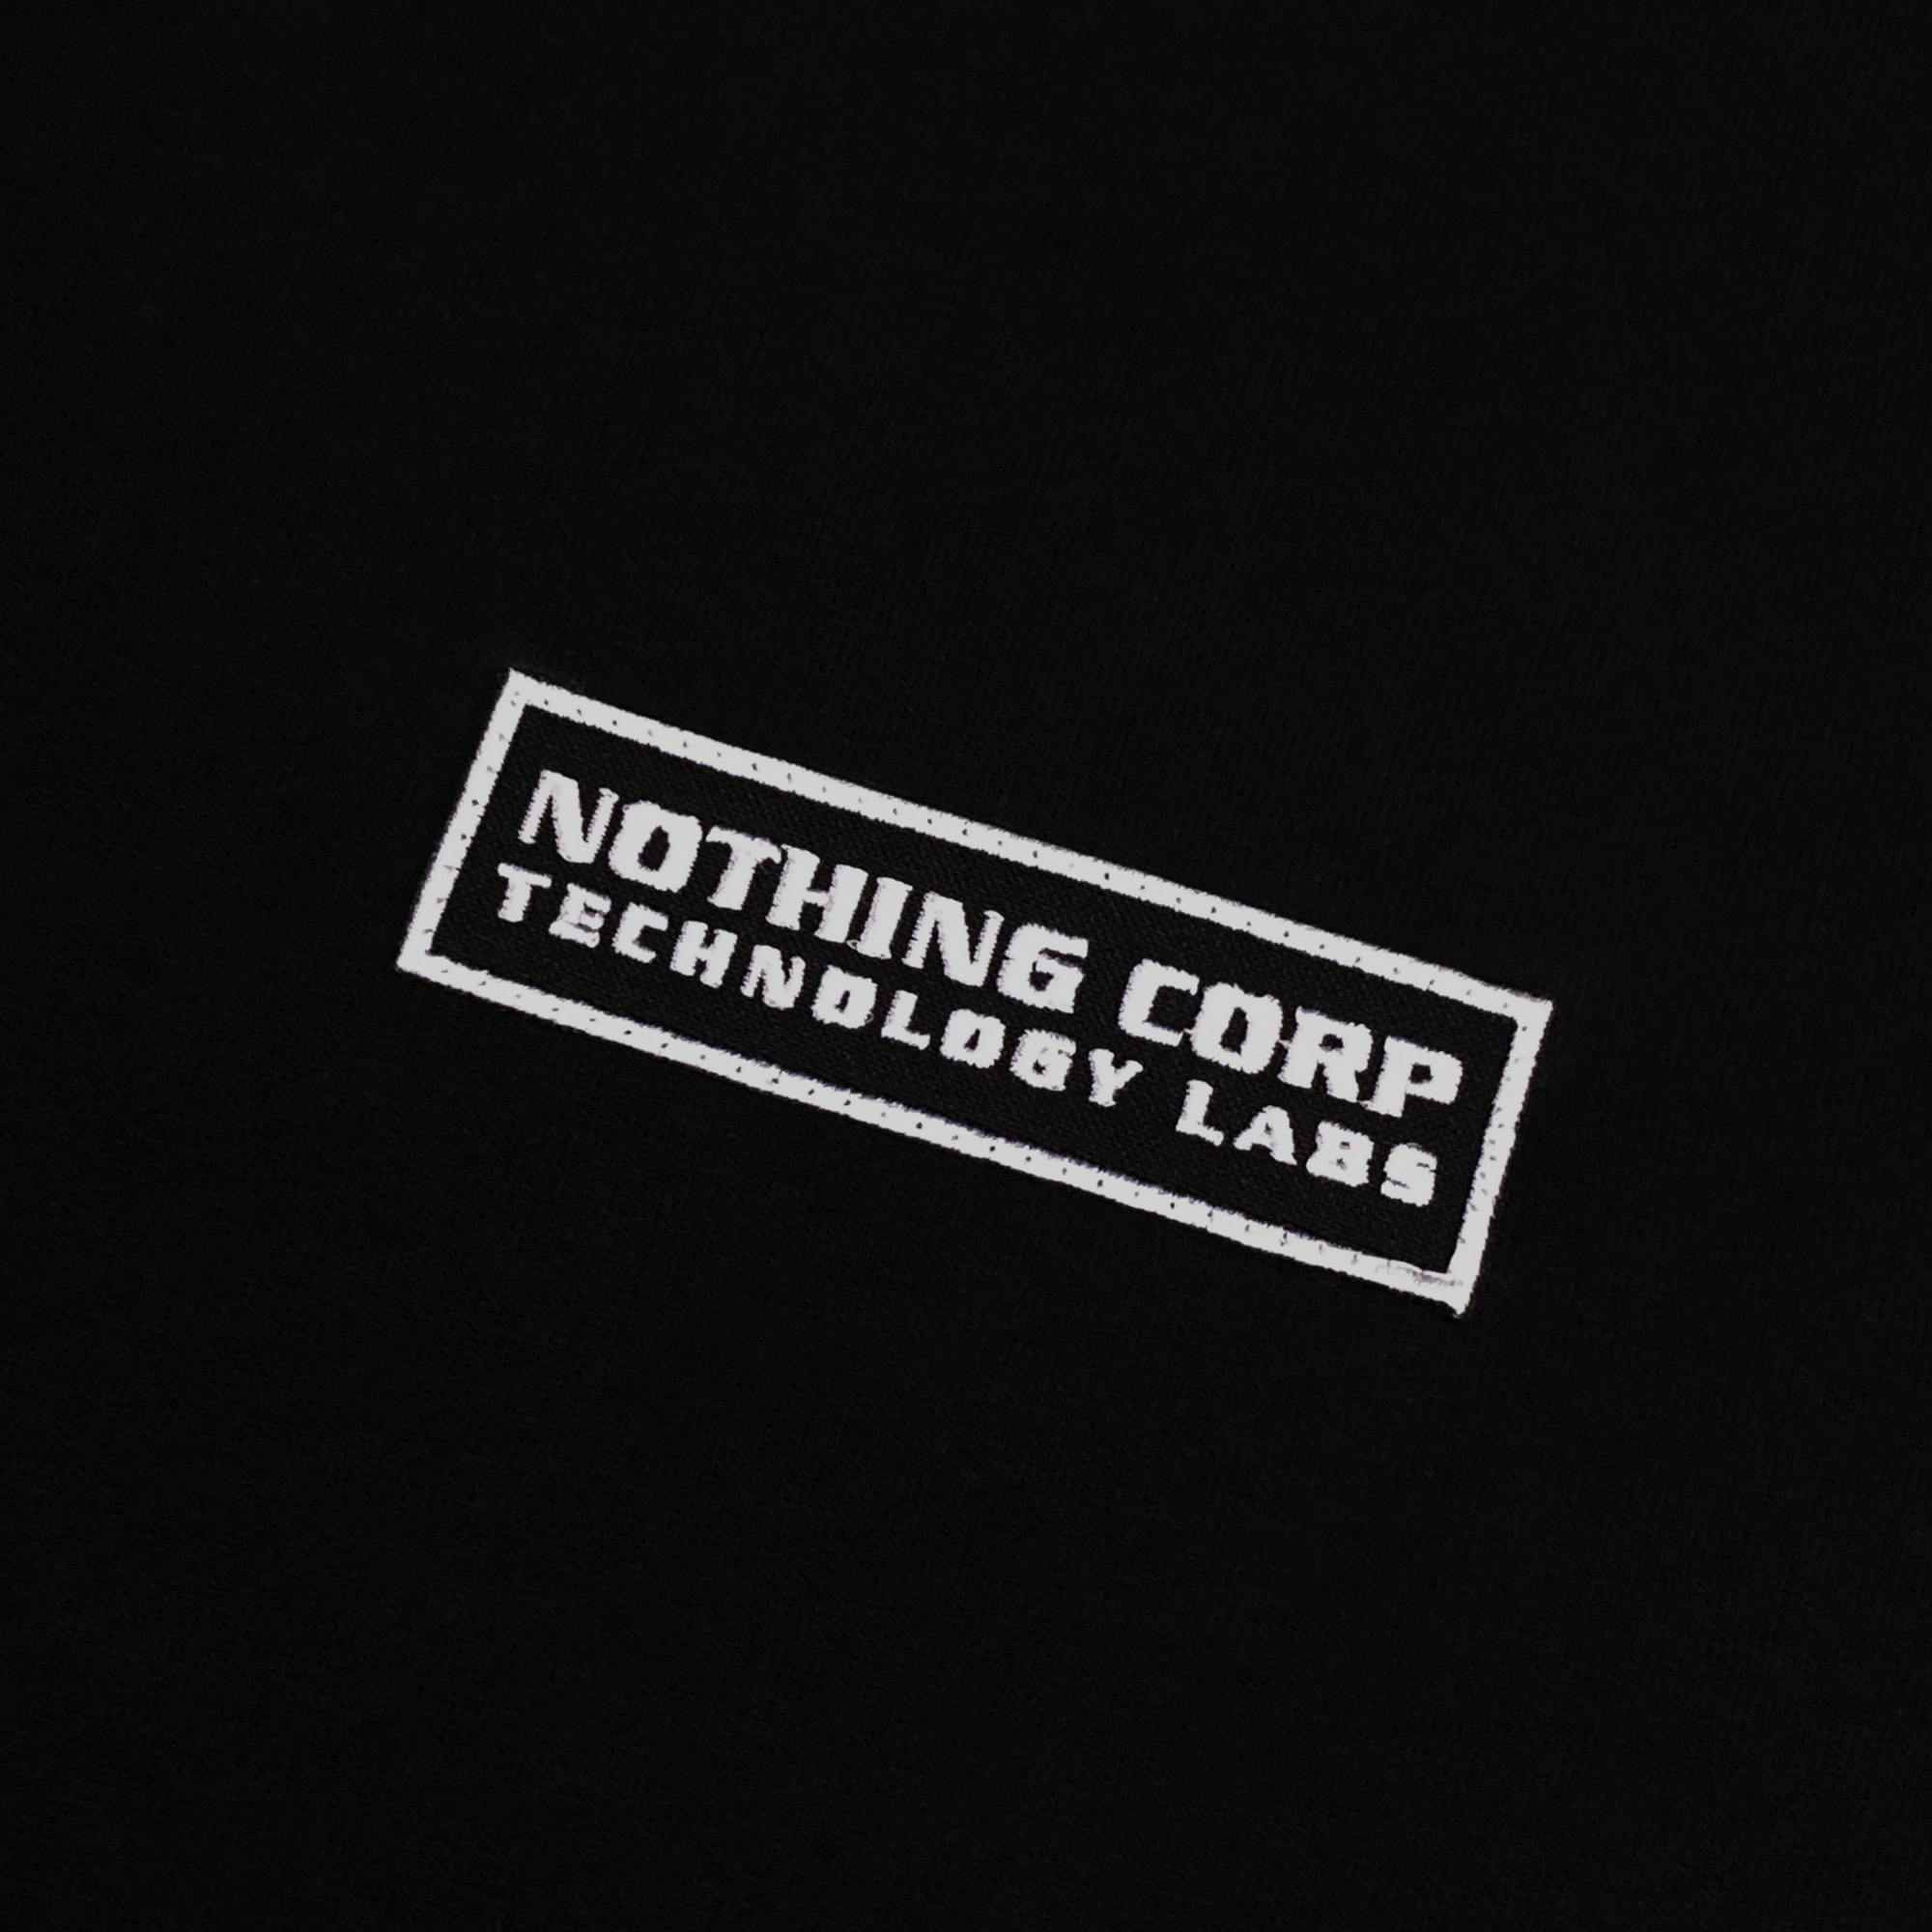 S01NOTBCORP Front Patch.jpg